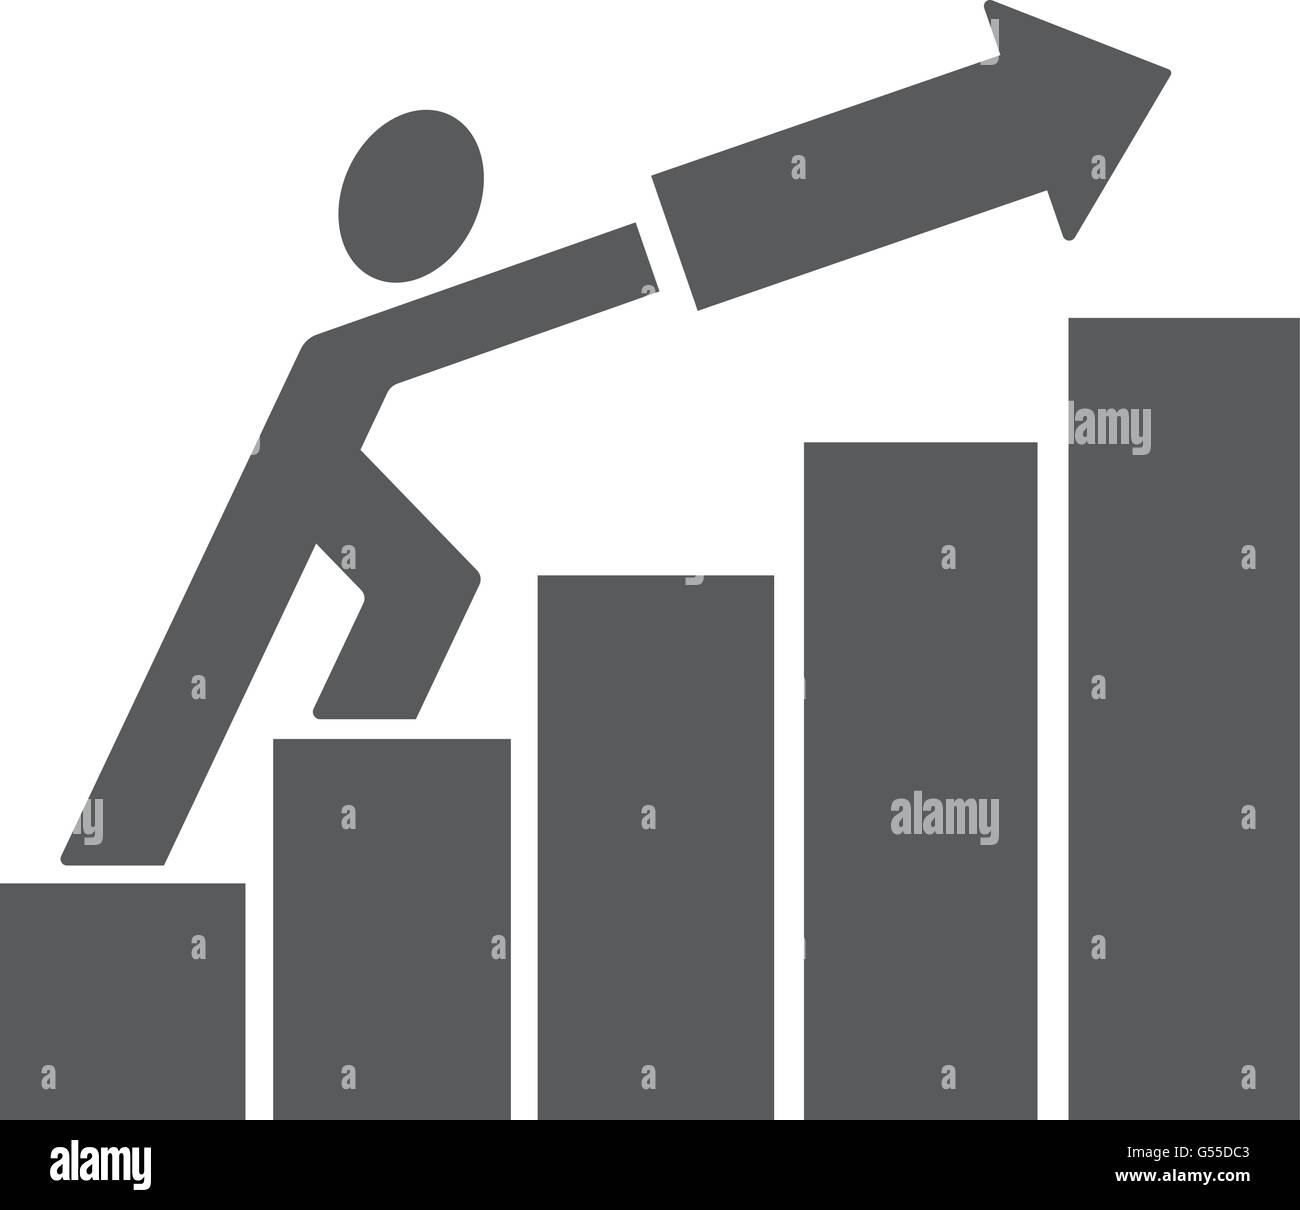 man pushing trend up business growing concept vector design Stock Vector